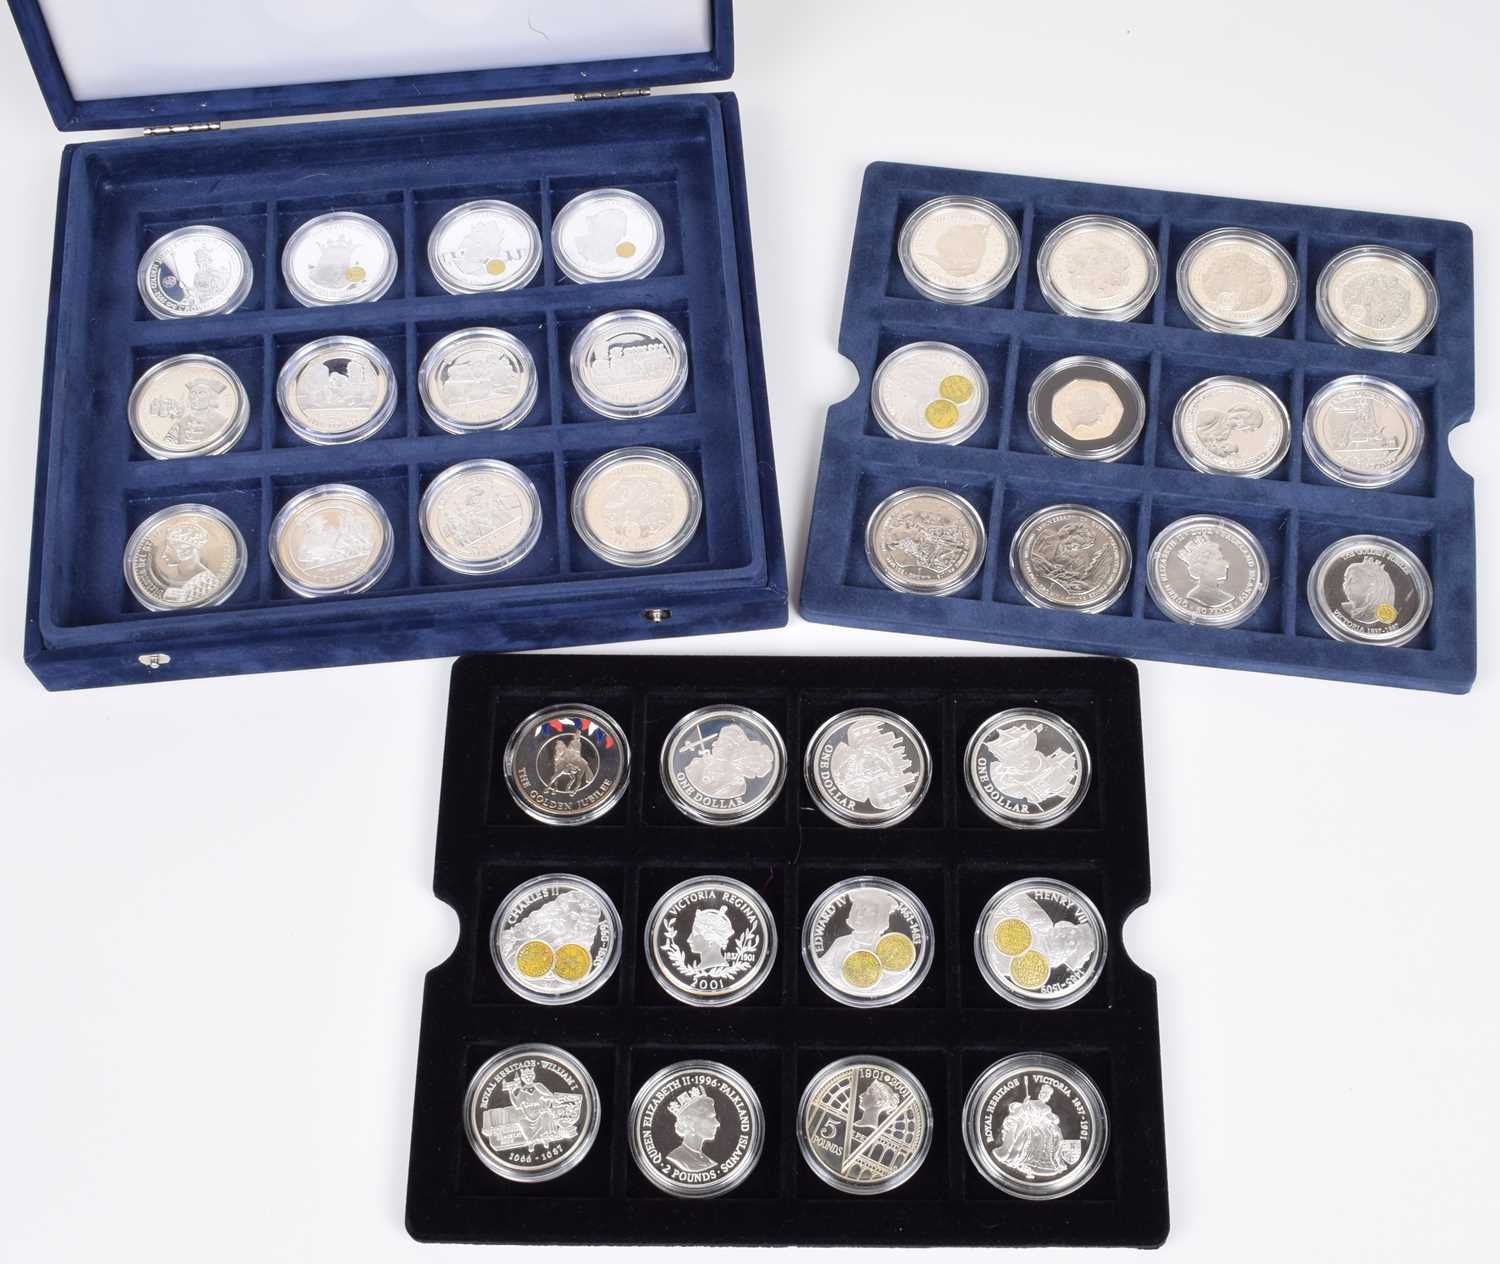 Lot 14 - Cased set of 36 silver proof coins to include many commemorative sized crowns, fifty pences etc.